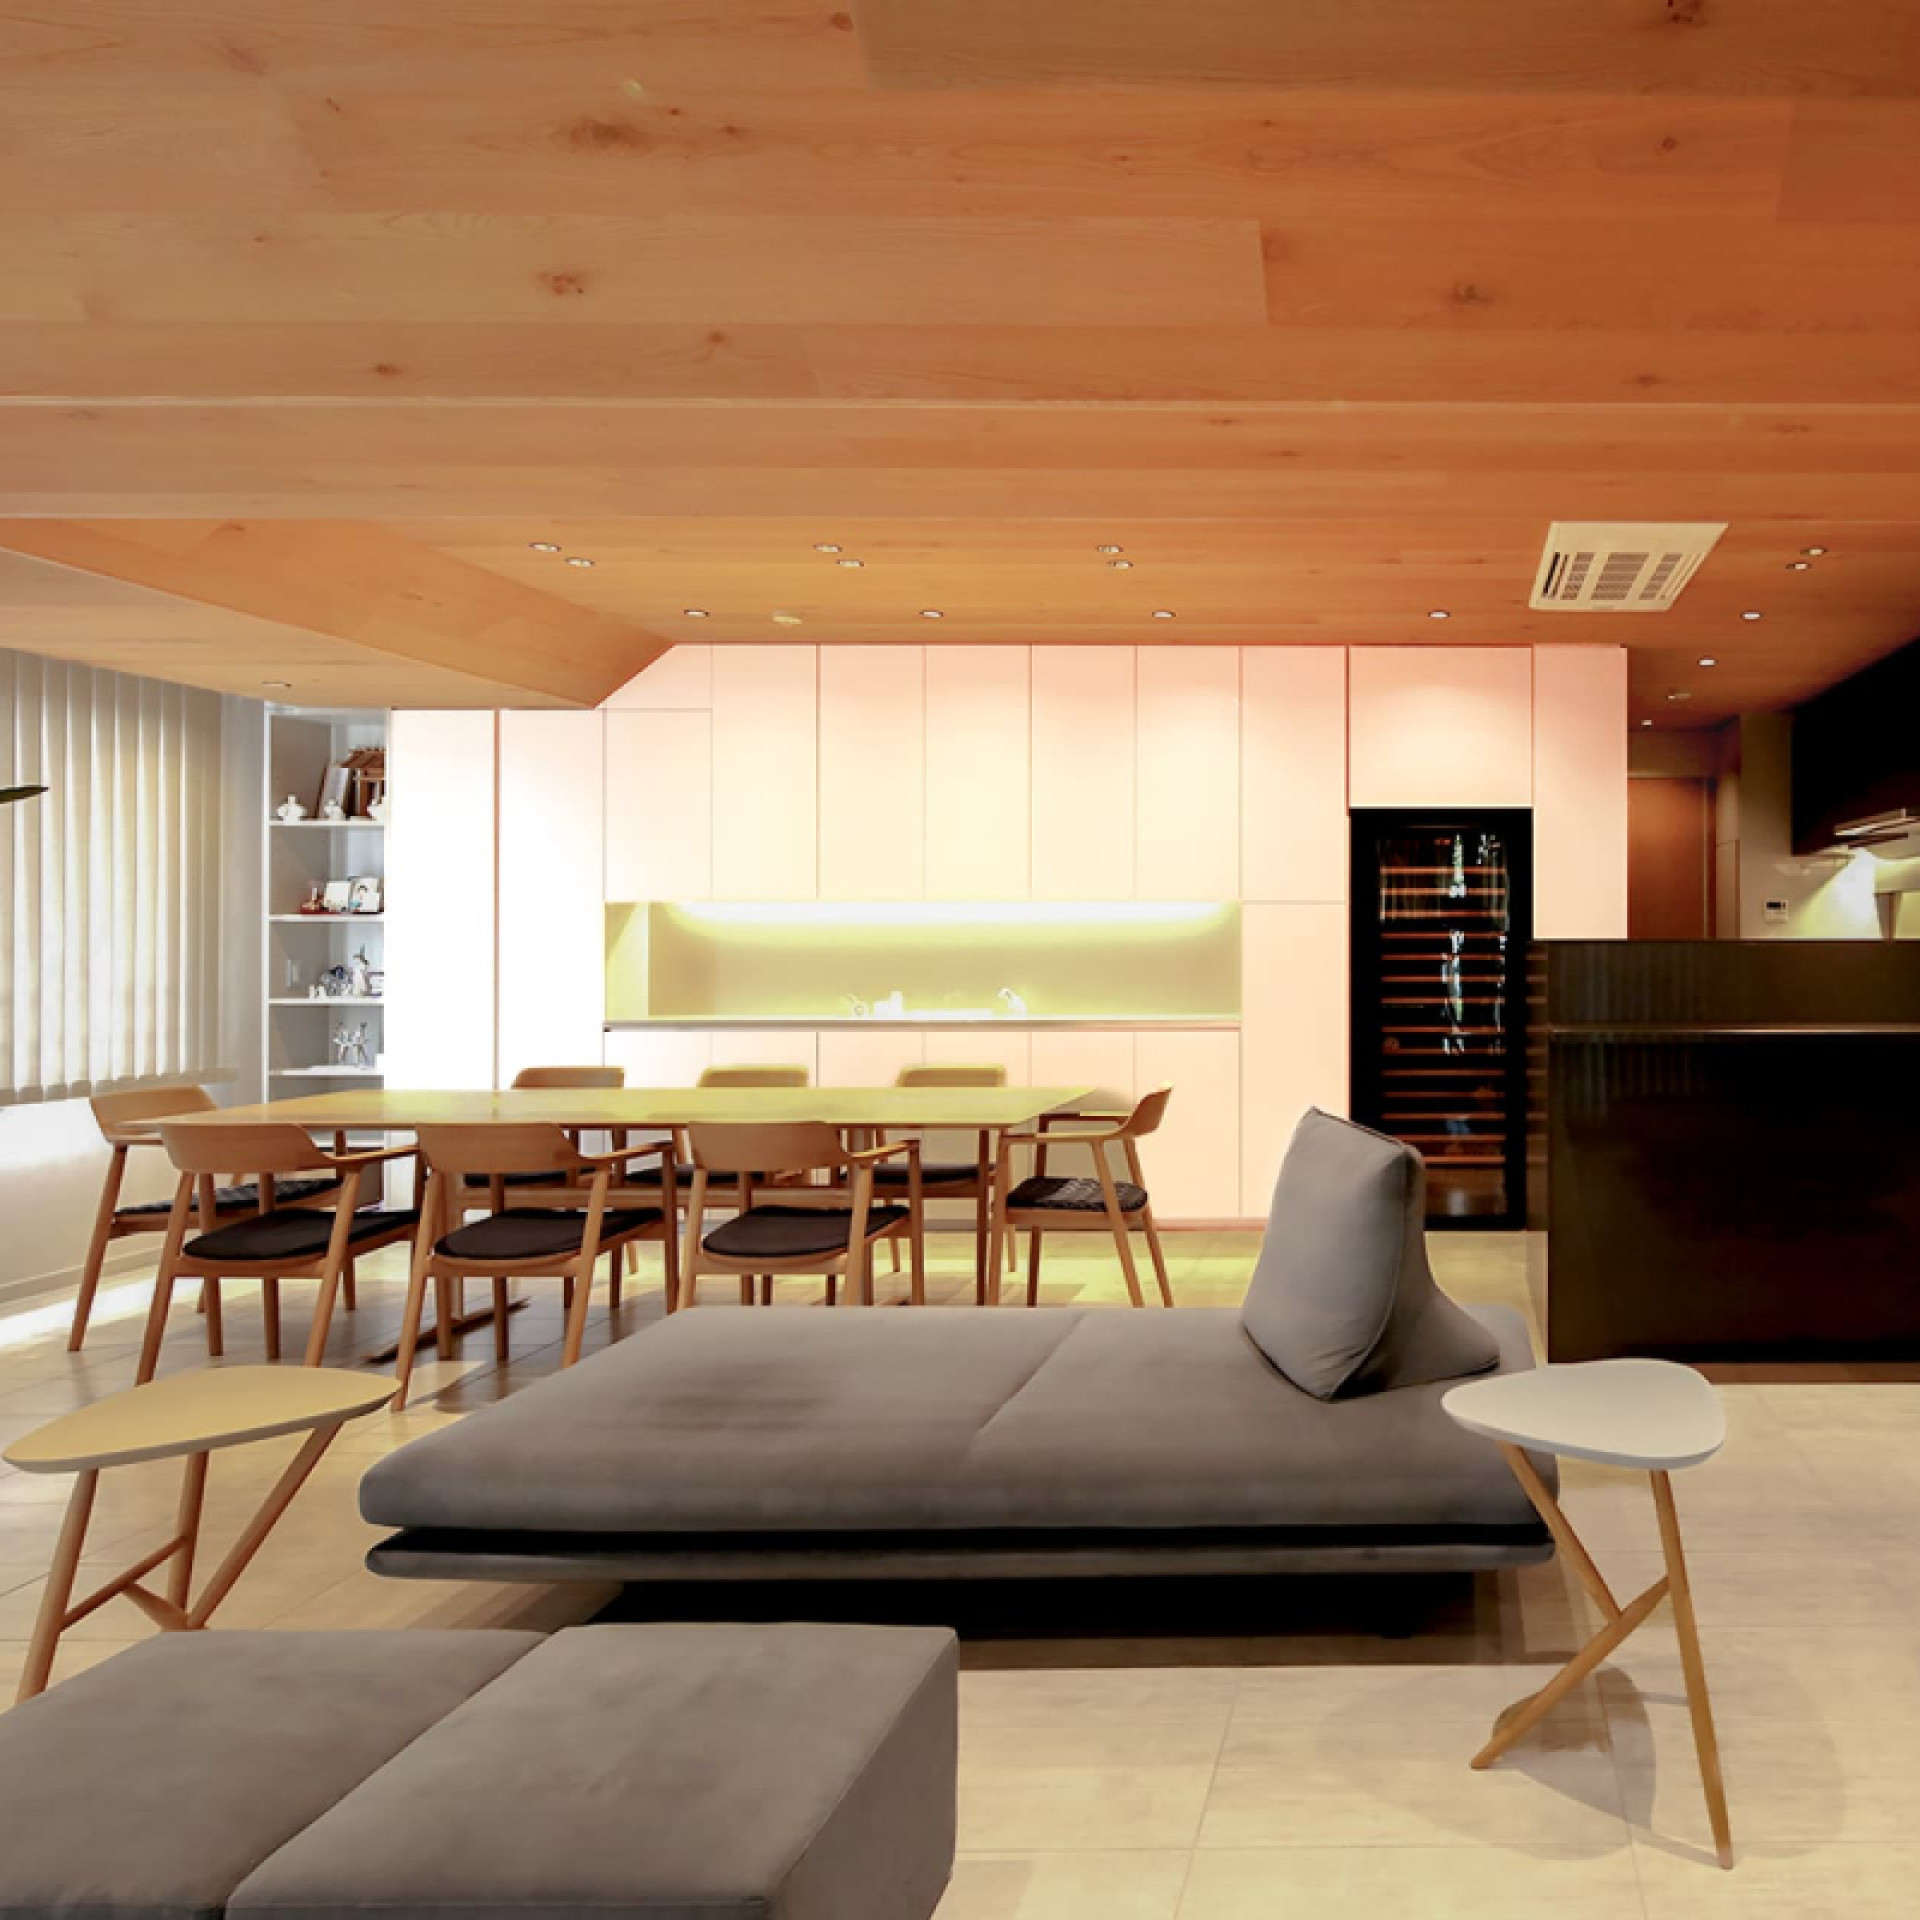 Renovation project of a house in Tokyo with a EuroCave built-in wine cabinet in a custom-made furniture in a living-room.